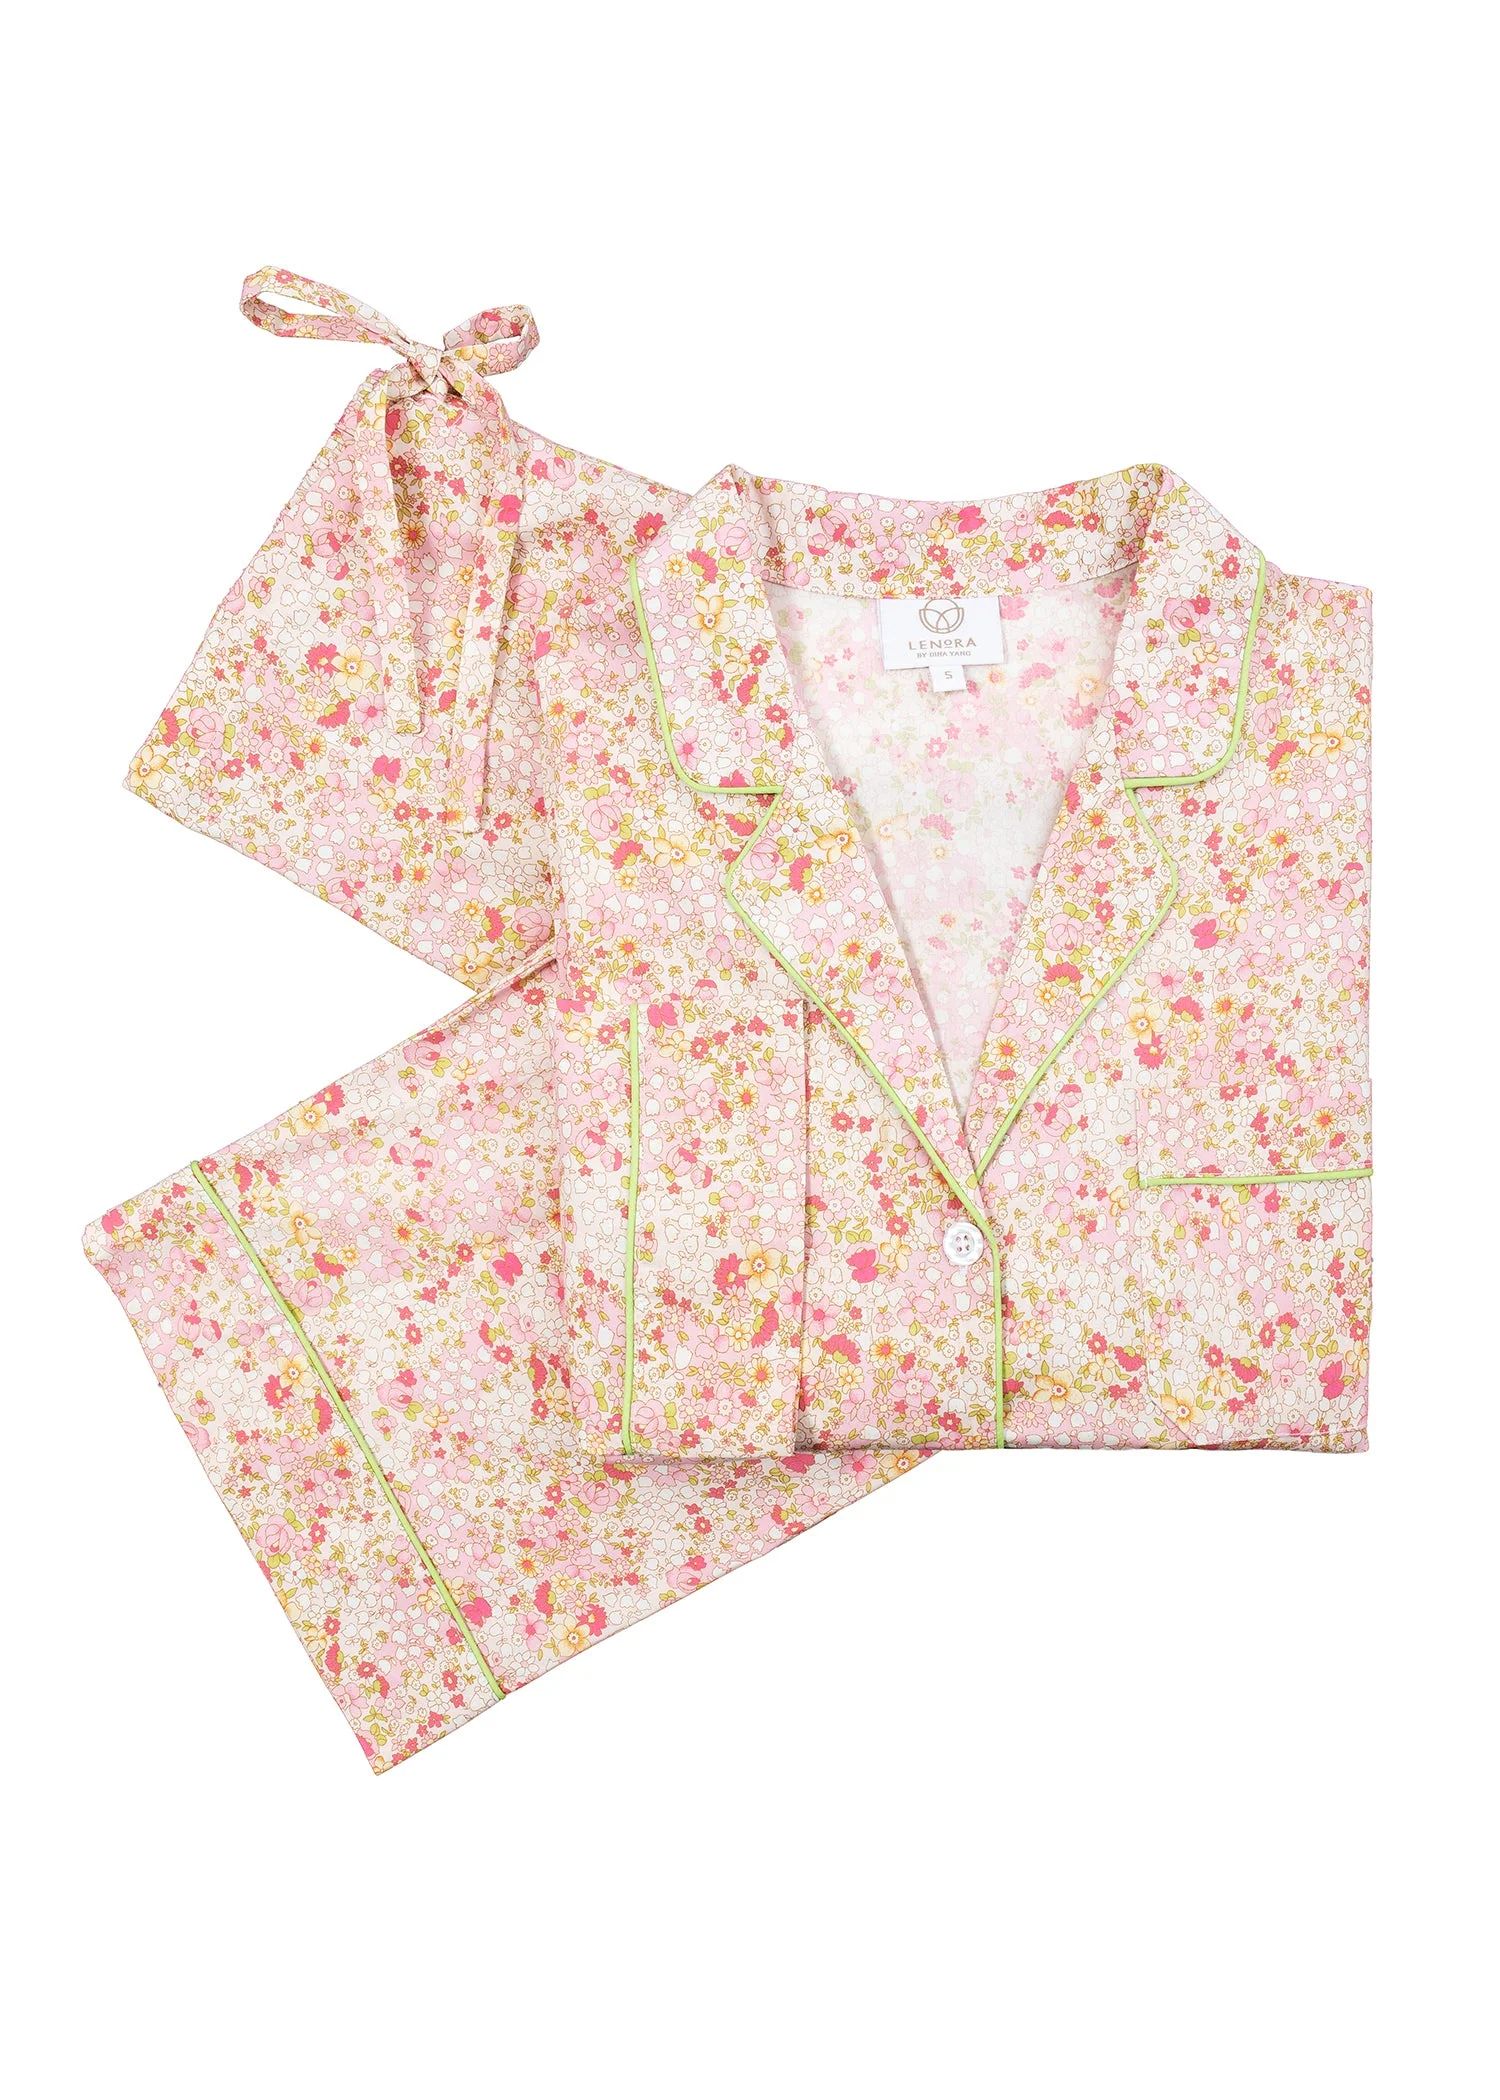 CLASSIC COTTON PAJAMAS IN PINK LIBERTY FLORAL | Lenora